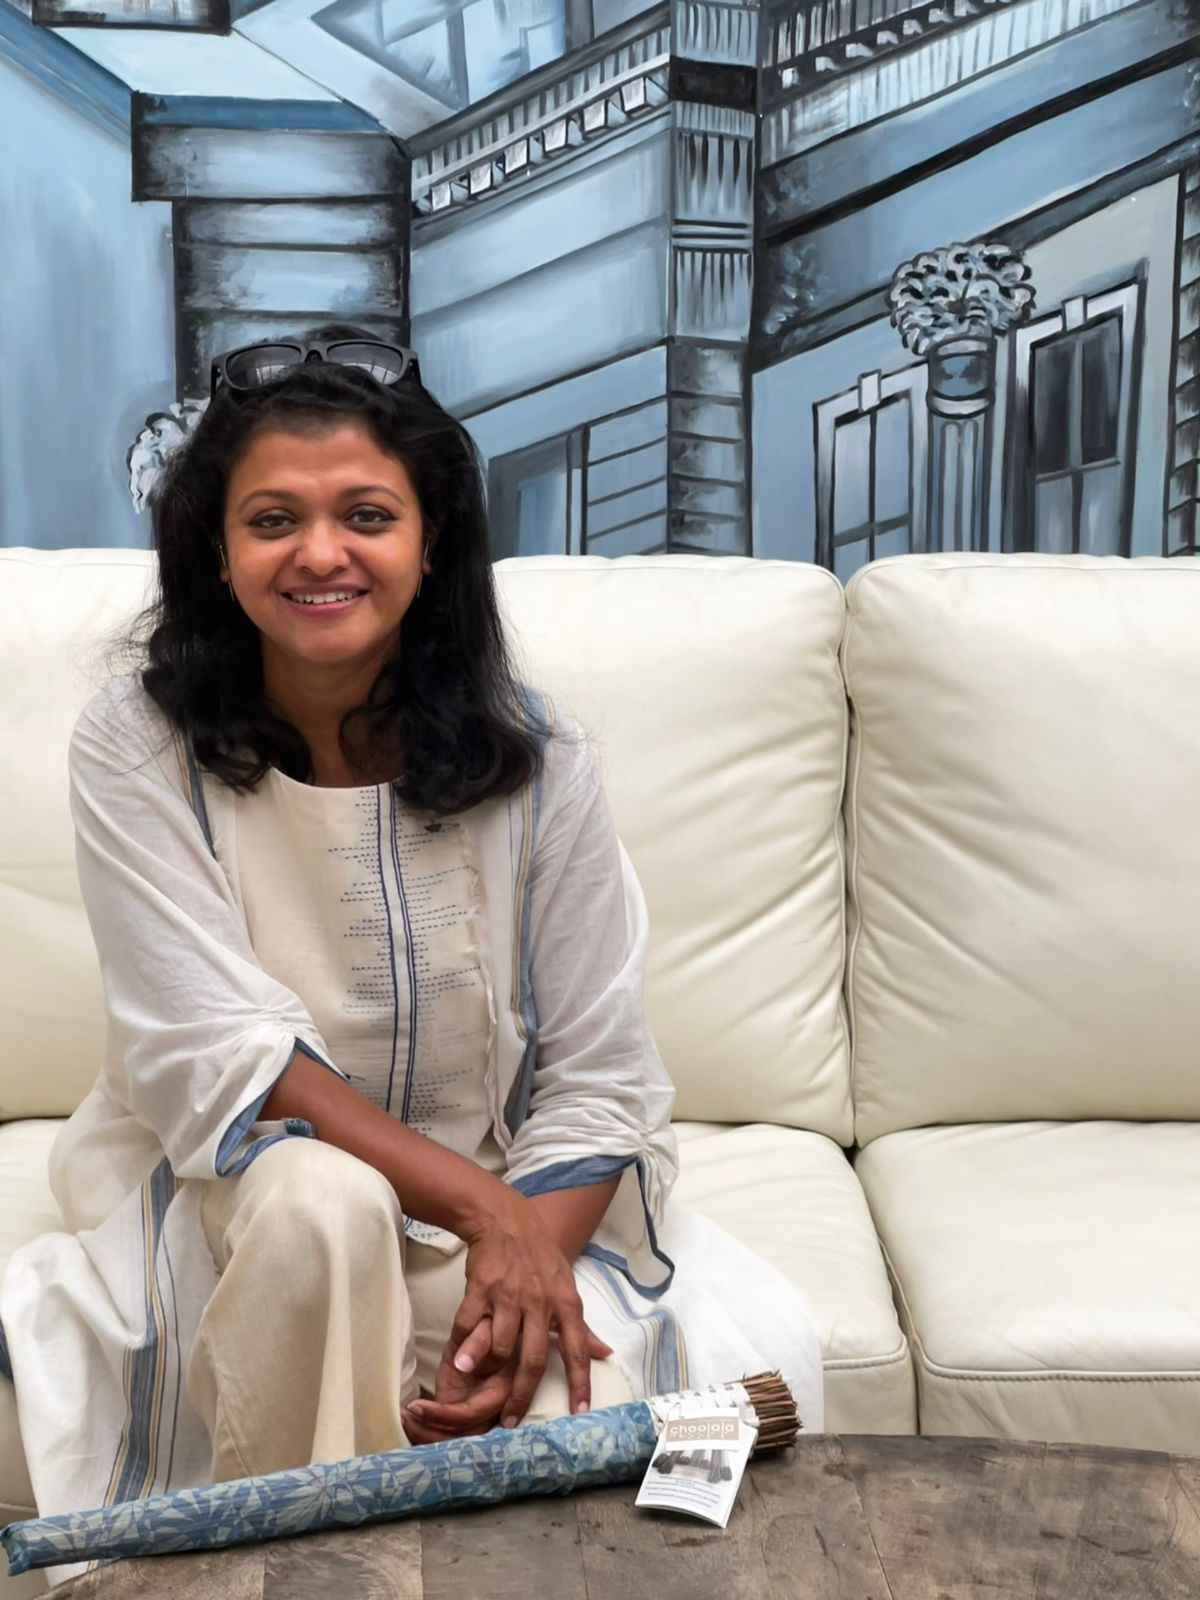 Lakshmi Menon, the founder of Choolala which engages visually impaired women to make broomsticks